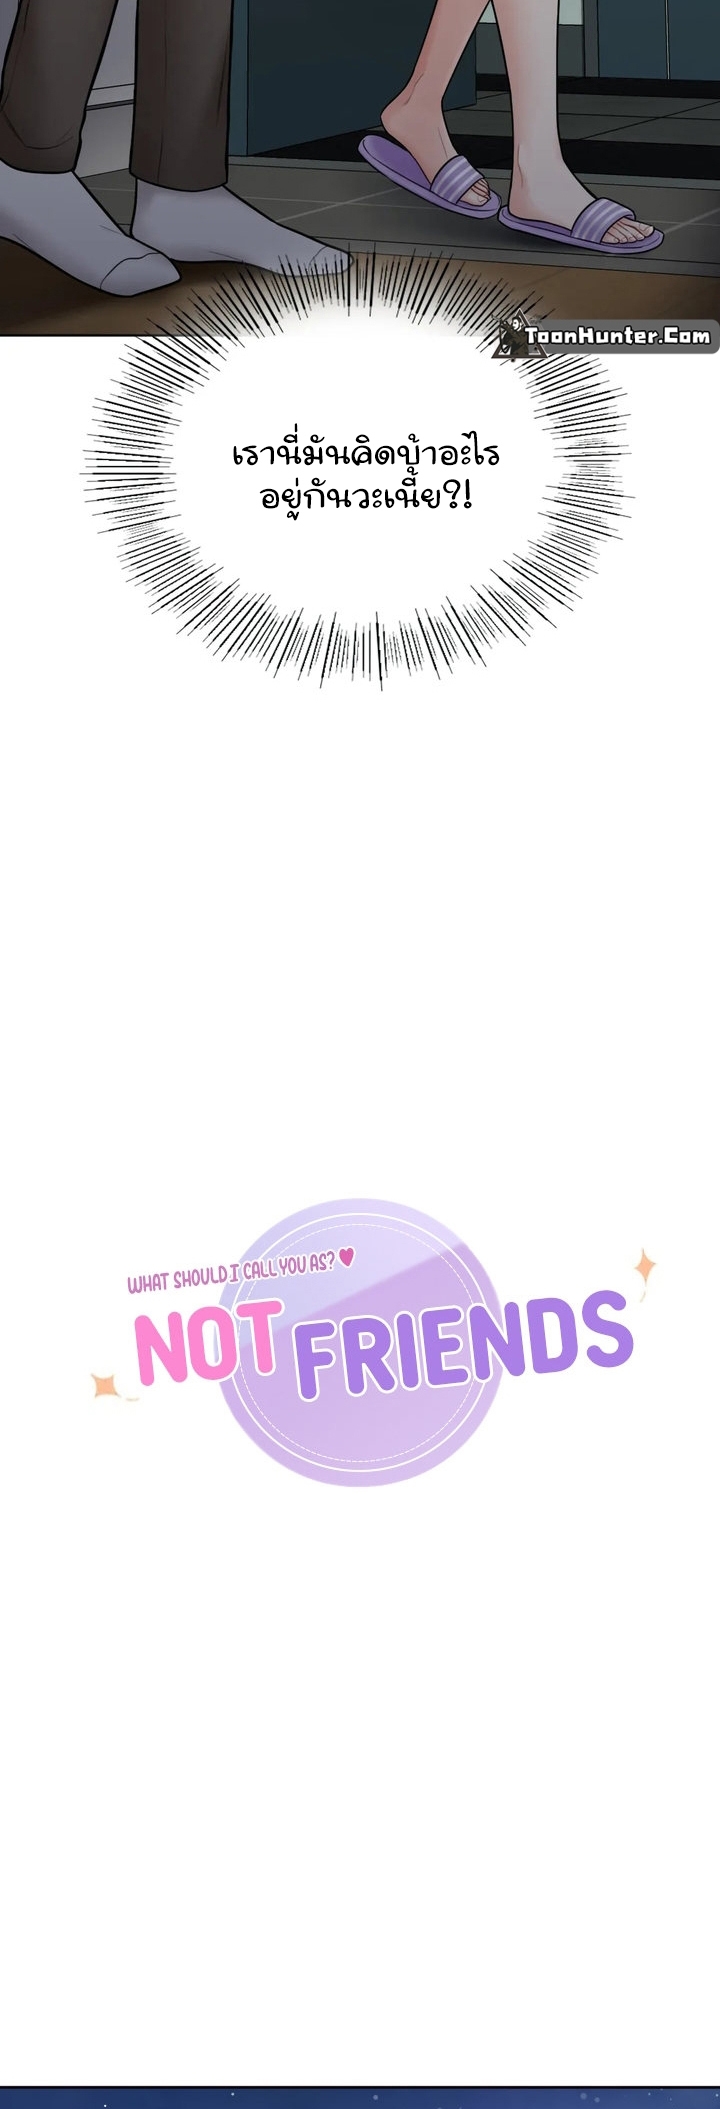 Not a friend – What do I call her as03